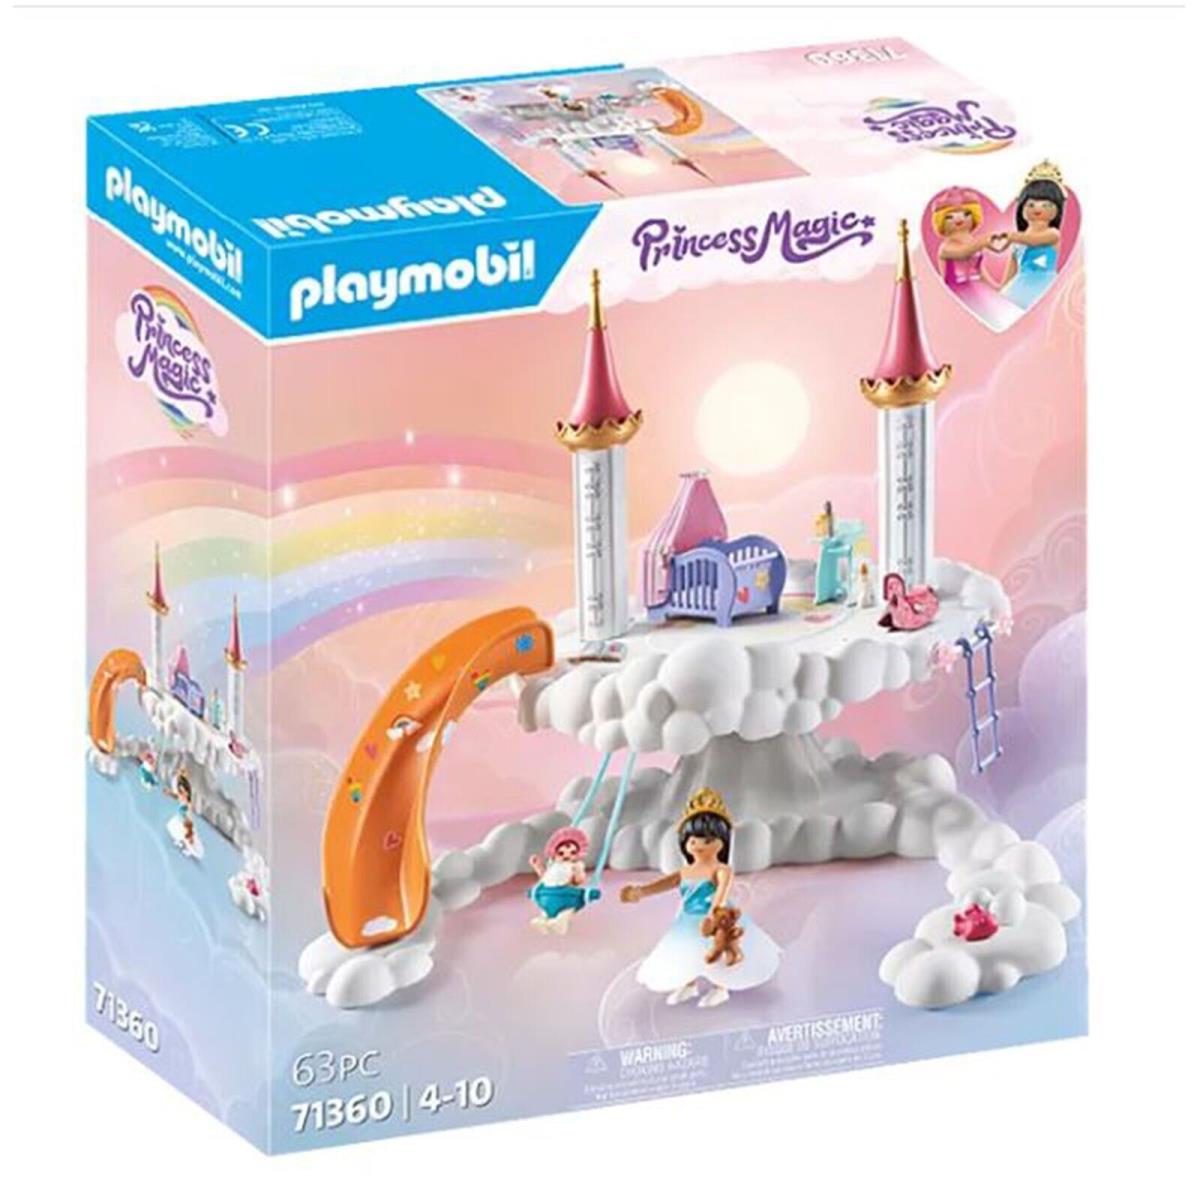 Playmobil Princess Magic Baby Cloud In The Clouds Building Set 71360NEW IN Stock